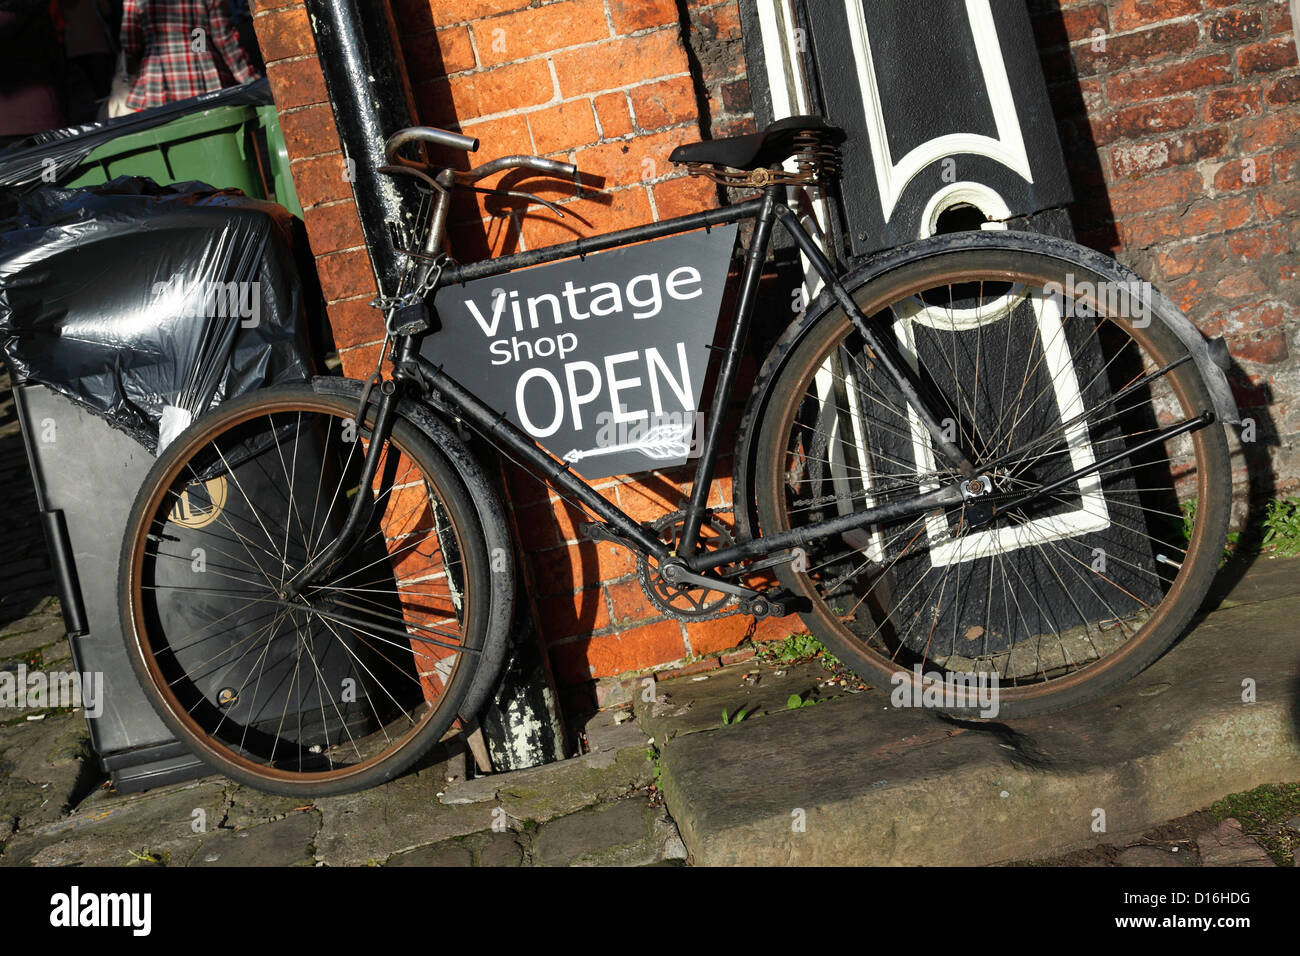 A vintage clothing shop sign in Lincoln, England, U.K. Stock Photo